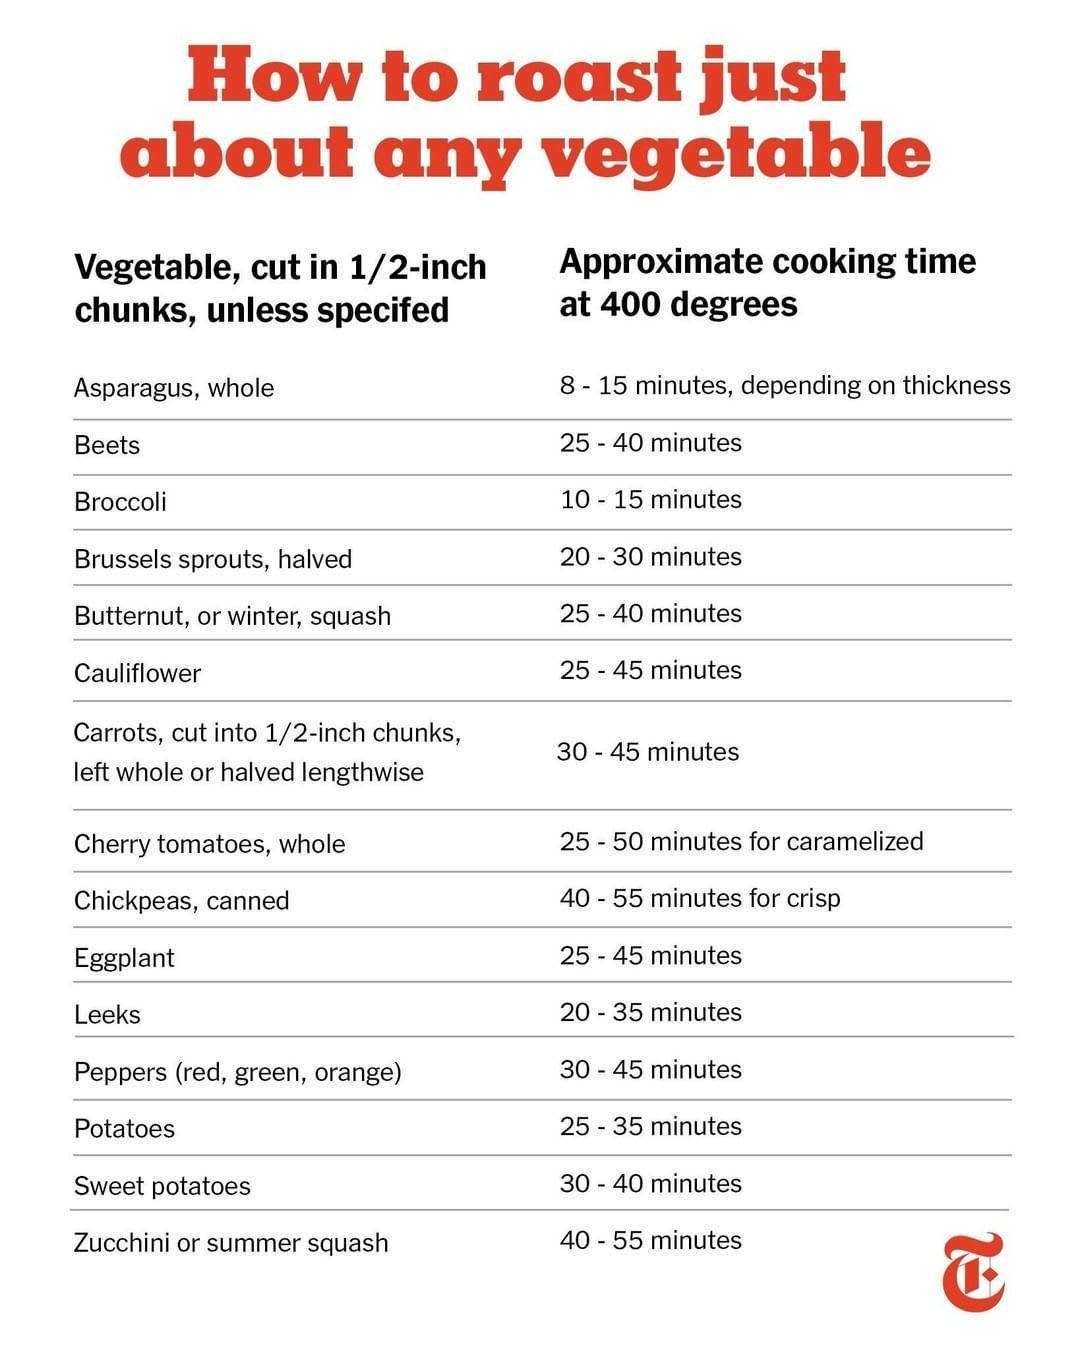 How to Roast Just About Any Vegetable | Nyt cooking, Roasted vegetables, Vegetable chart